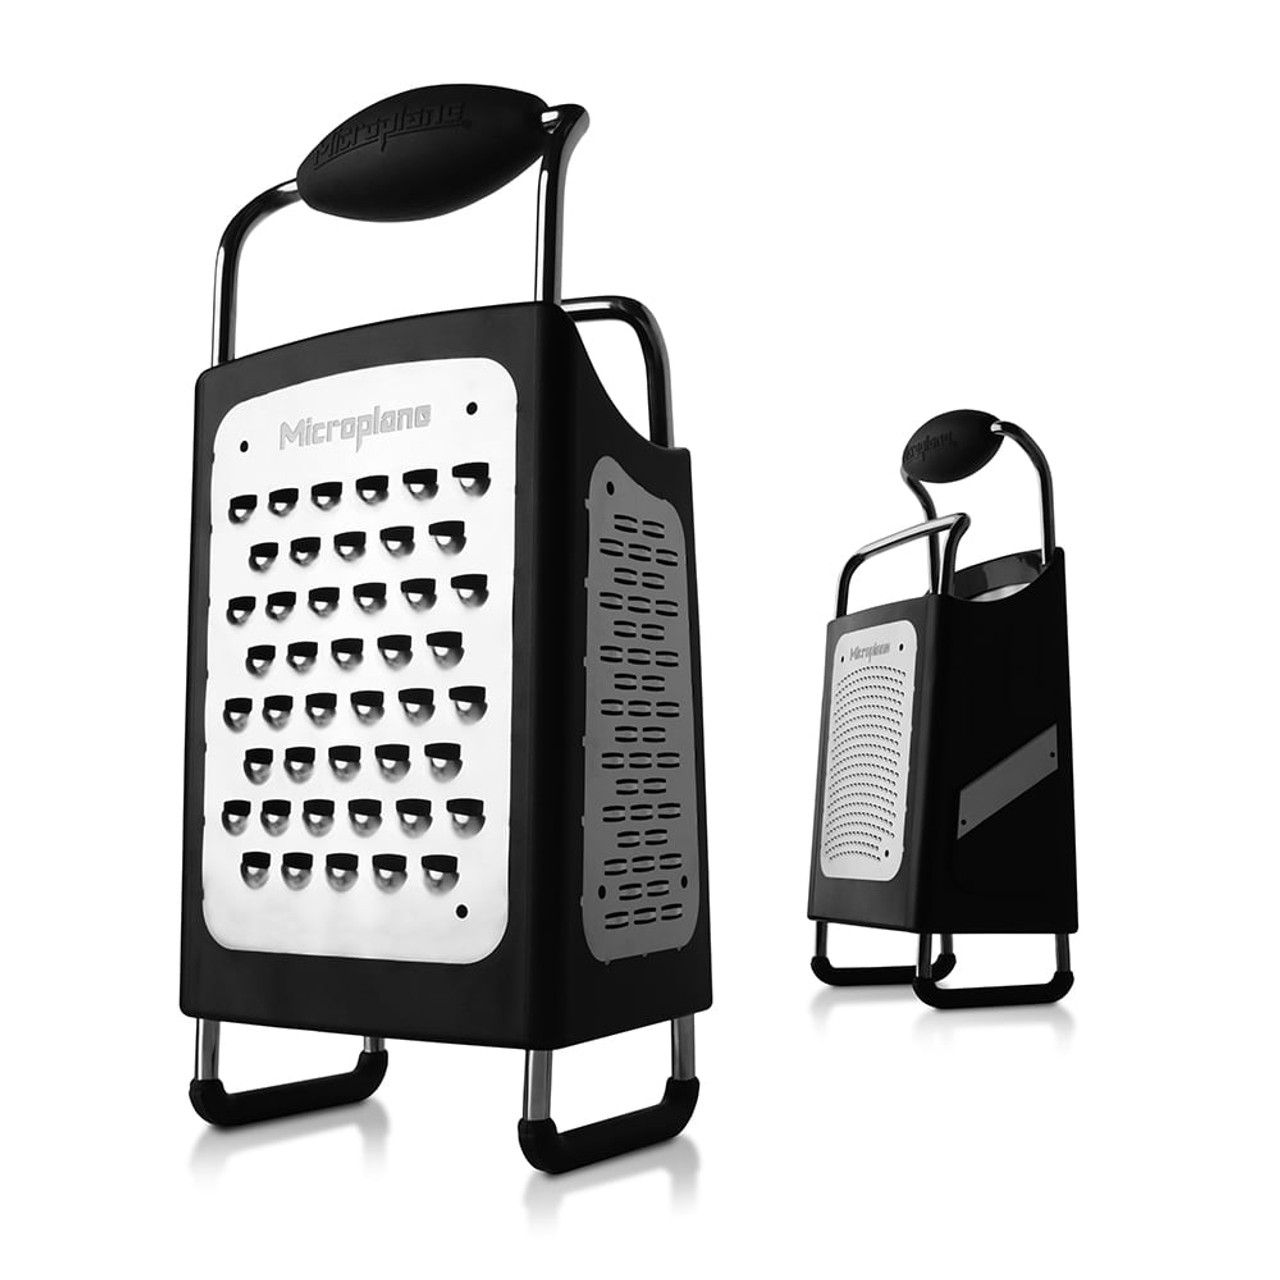 https://cdn11.bigcommerce.com/s-hccytny0od/images/stencil/1280x1280/products/1191/2753/microplane-4-sided-box-grater__71162.1512468676.jpg?c=2?imbypass=on